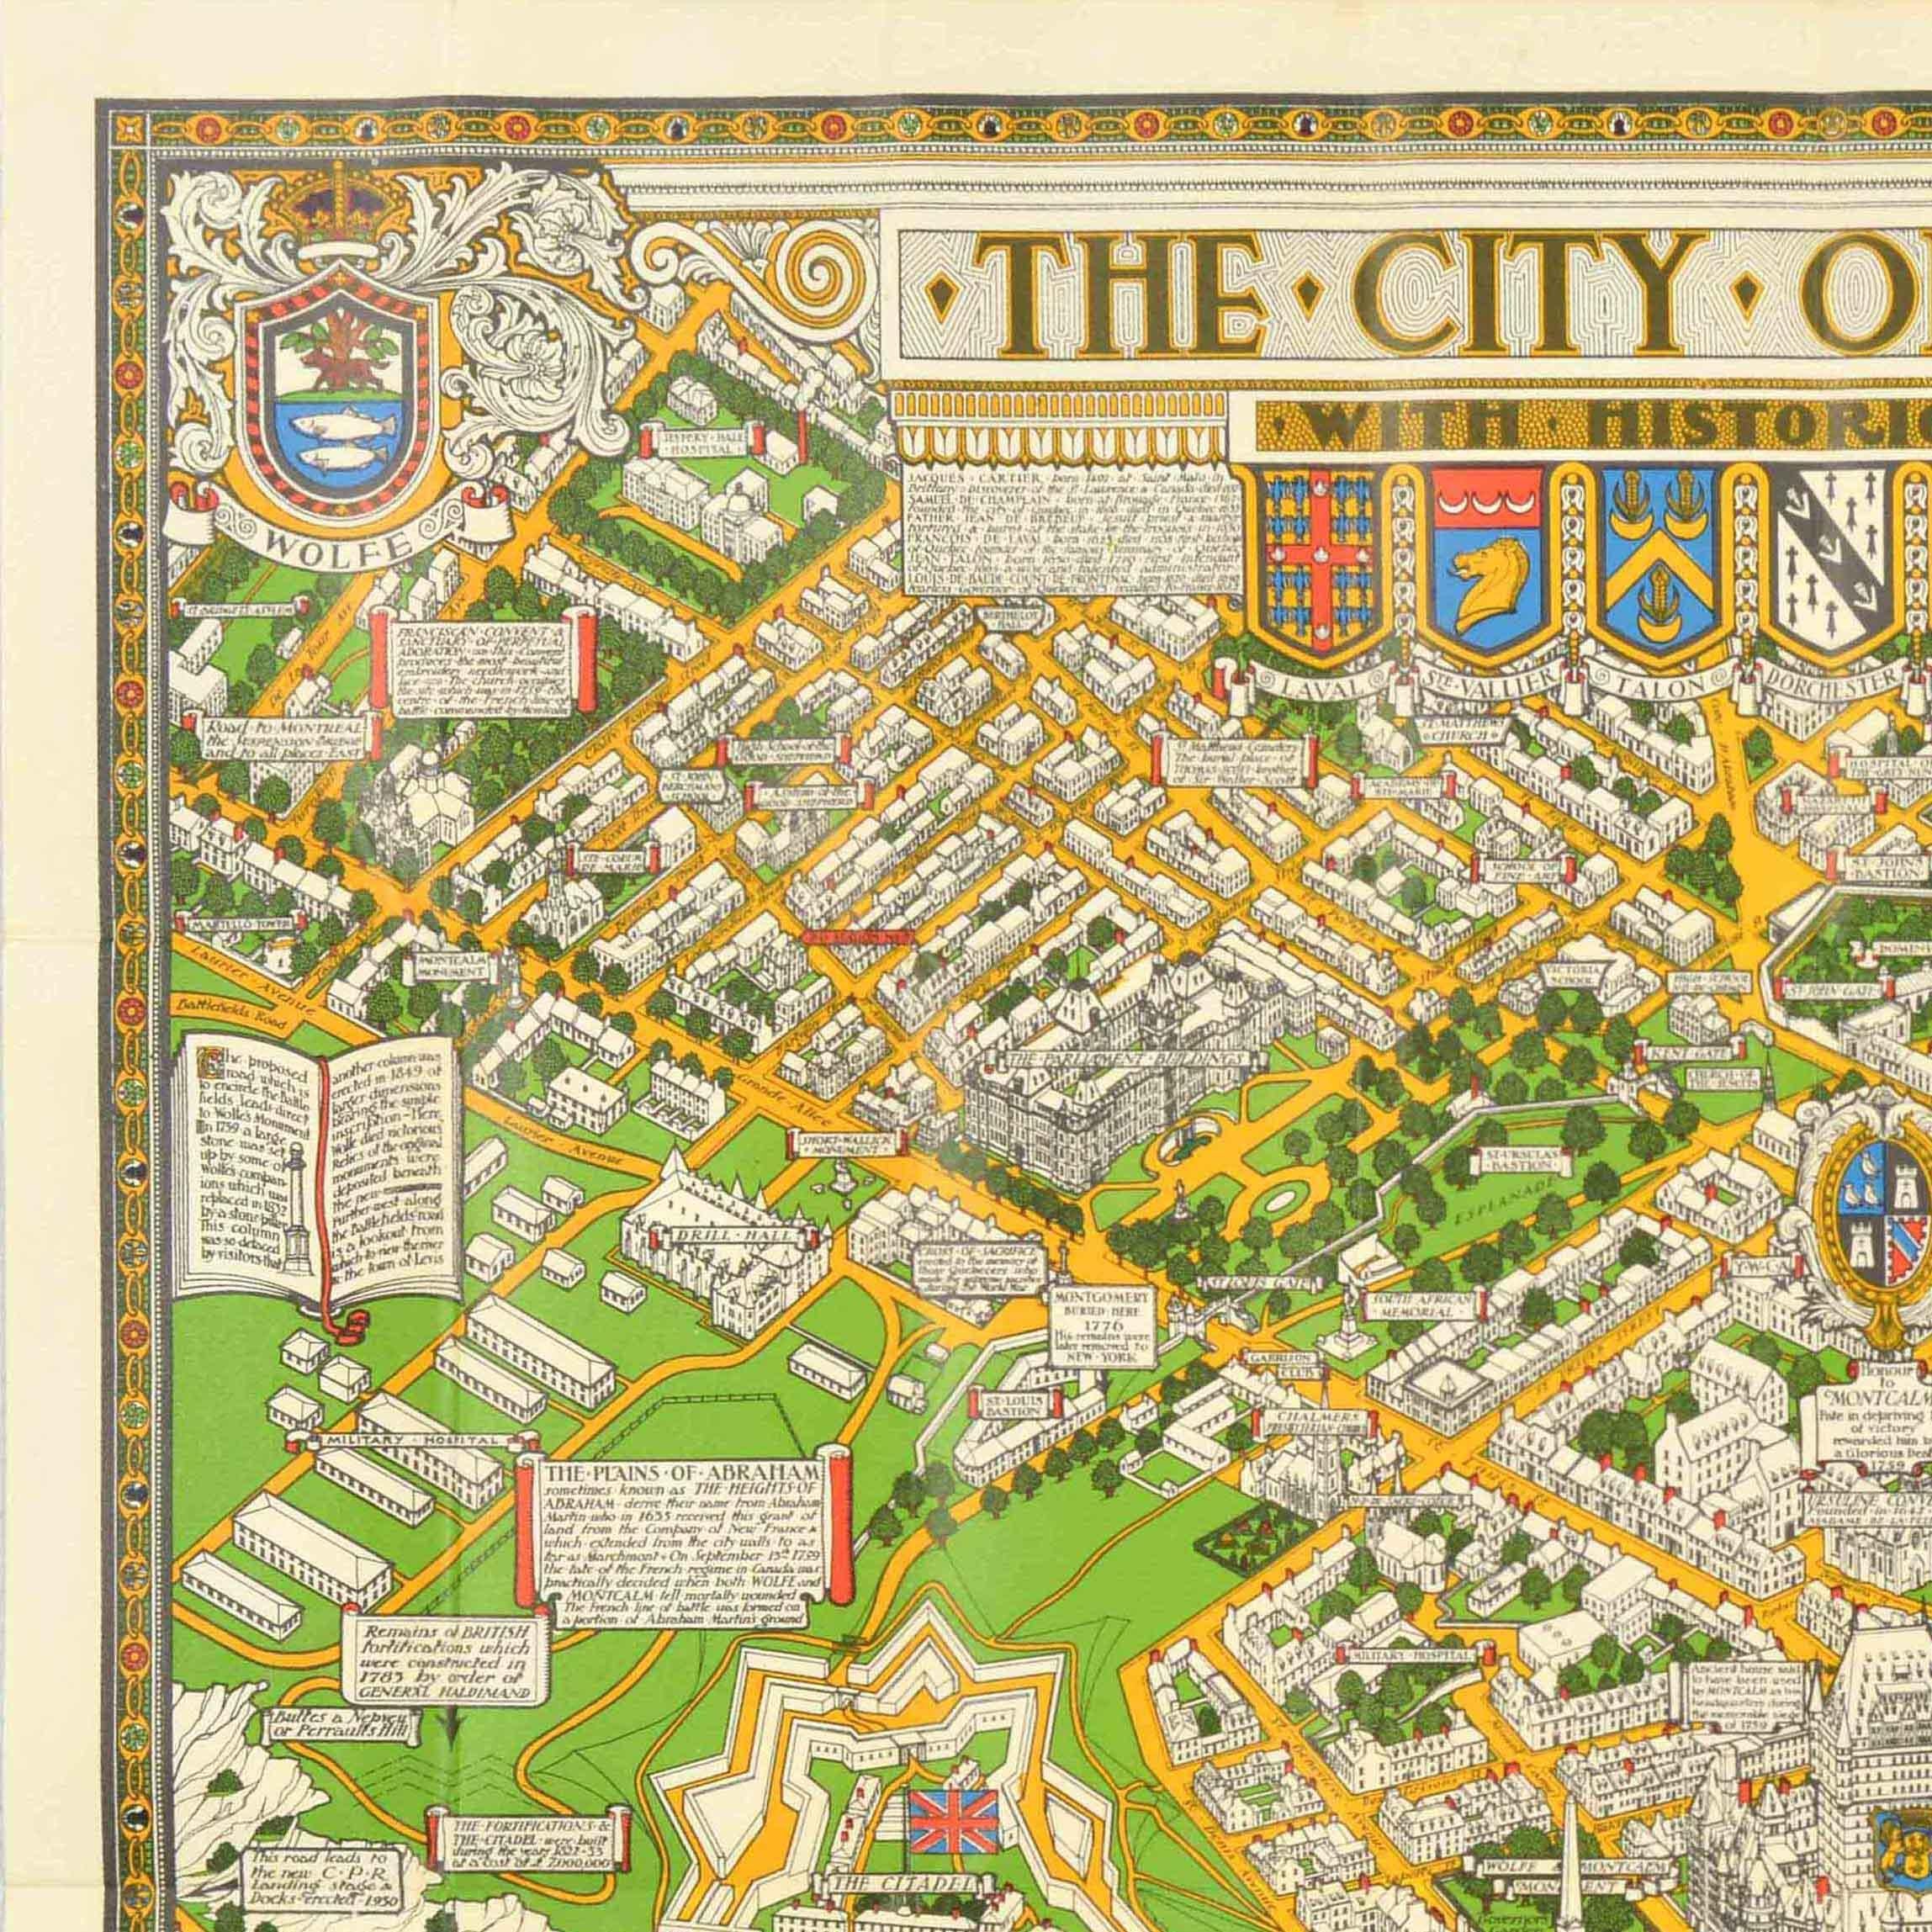 Original vintage travel map poster for The City of Quebec with historical notes drawn by S.H. Maw Toronto (Samuel Herbert Maw; 1881-1952) featuring a colourful pictorial map illustrated with coats of arms and historical buildings showing the streets